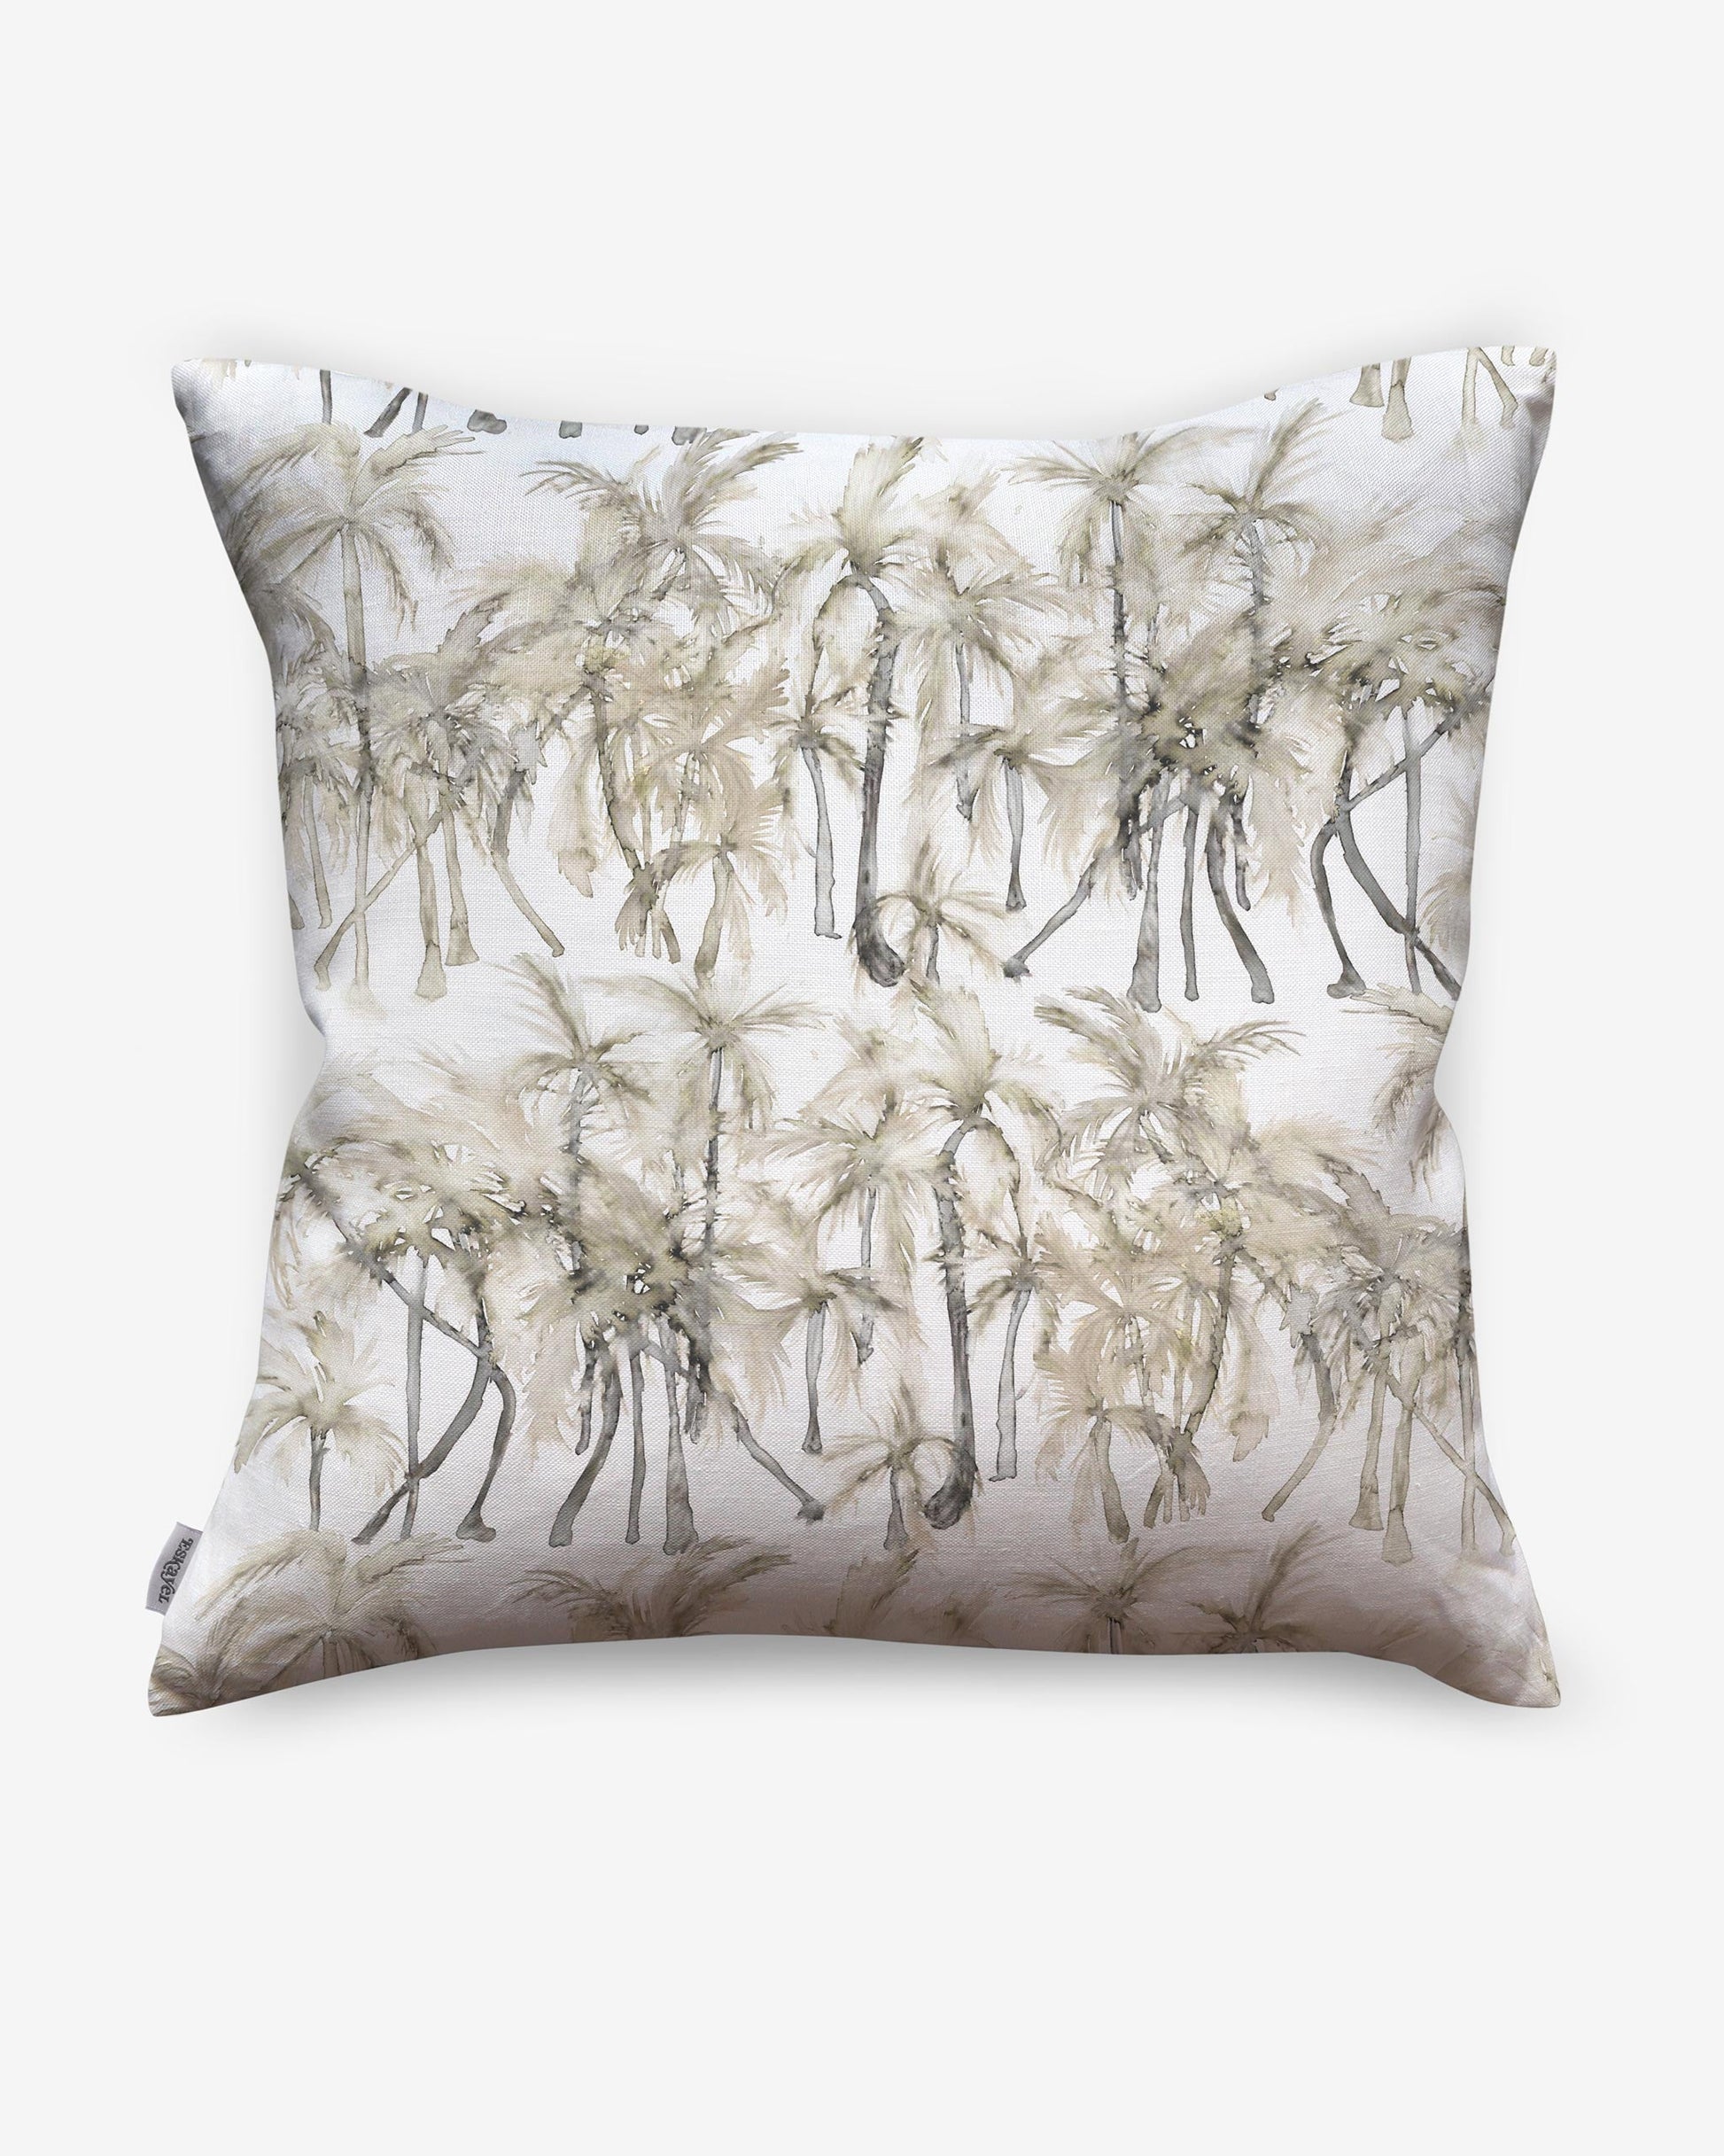 A luxury Palm Dance Pillow Sand with a watercolor pattern of palm trees